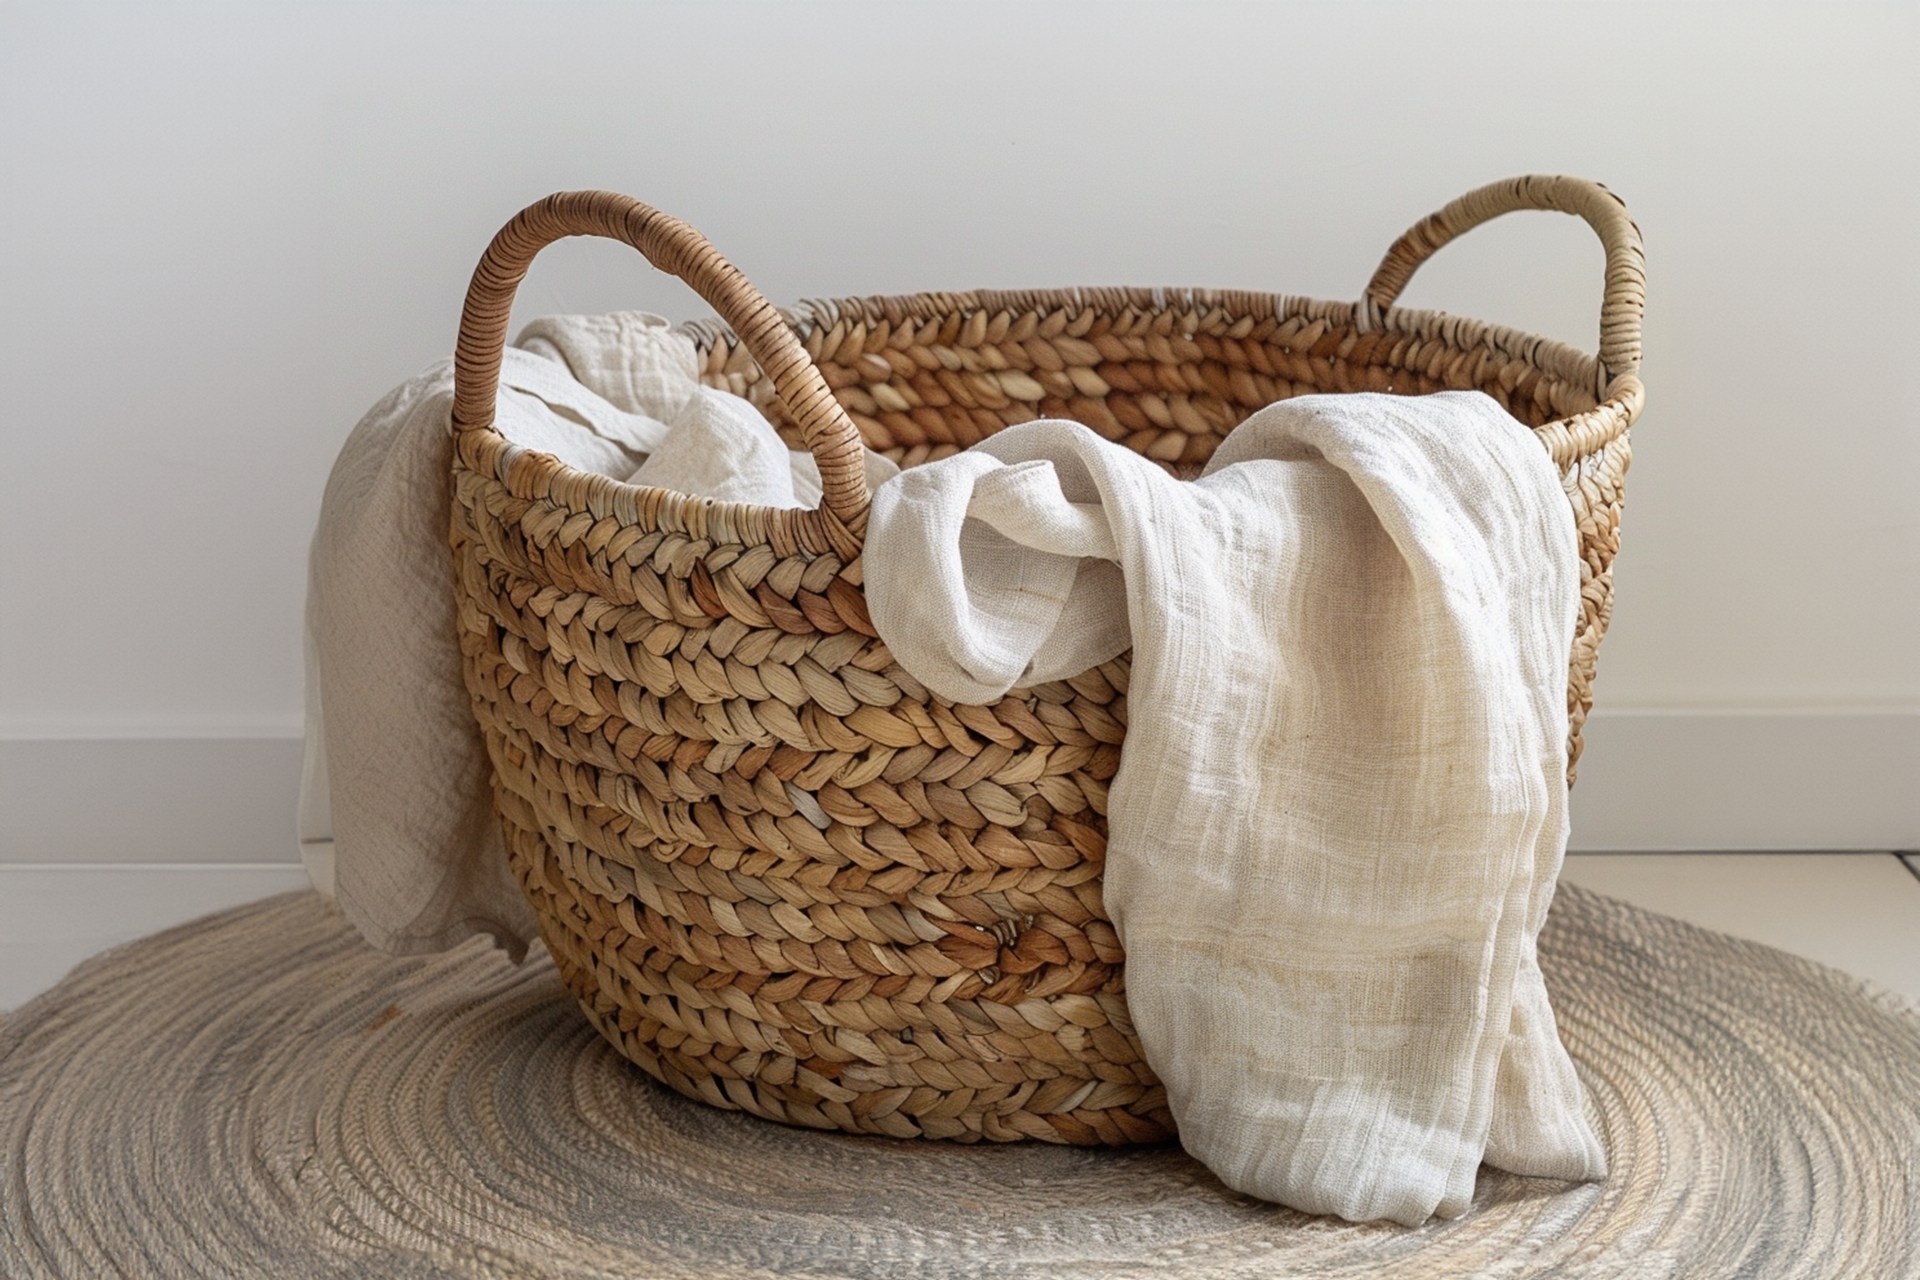 Linen care guide: How to wash your linen cothes?